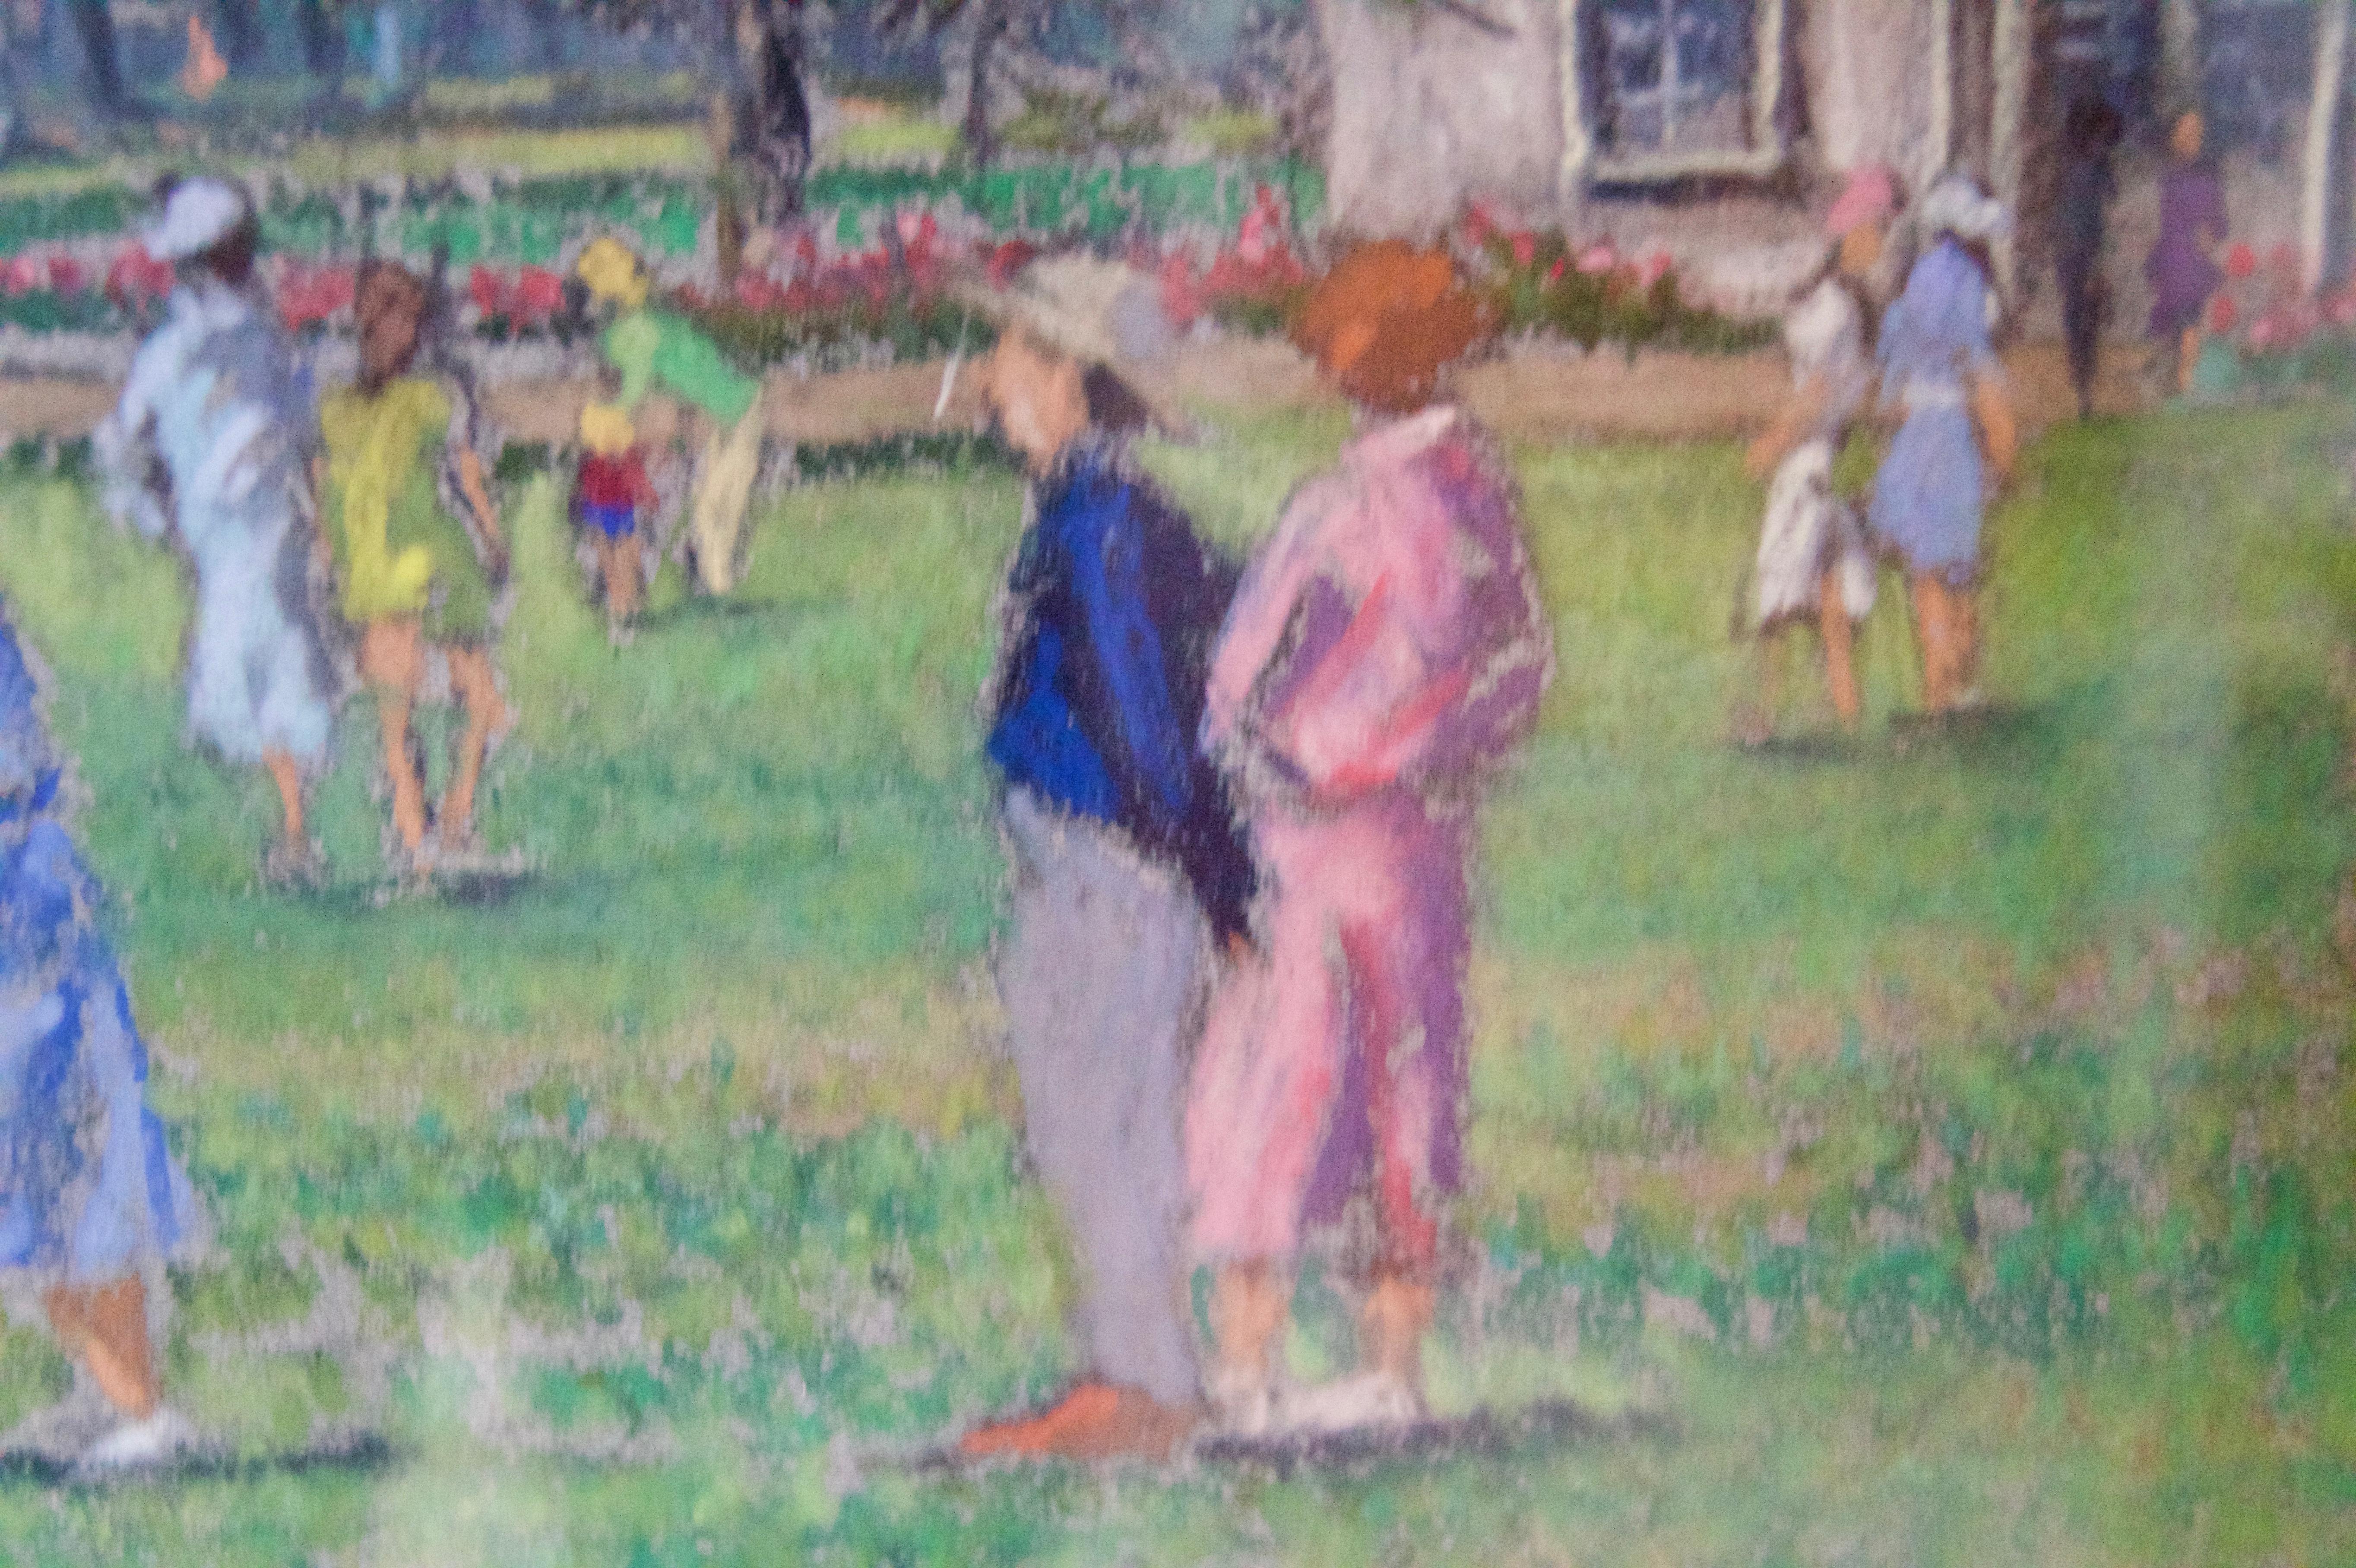 Country Celebration - Mid 20th Century Impressionist Oil Piece of Manor House - Post-Impressionist Painting by William Henry Innes